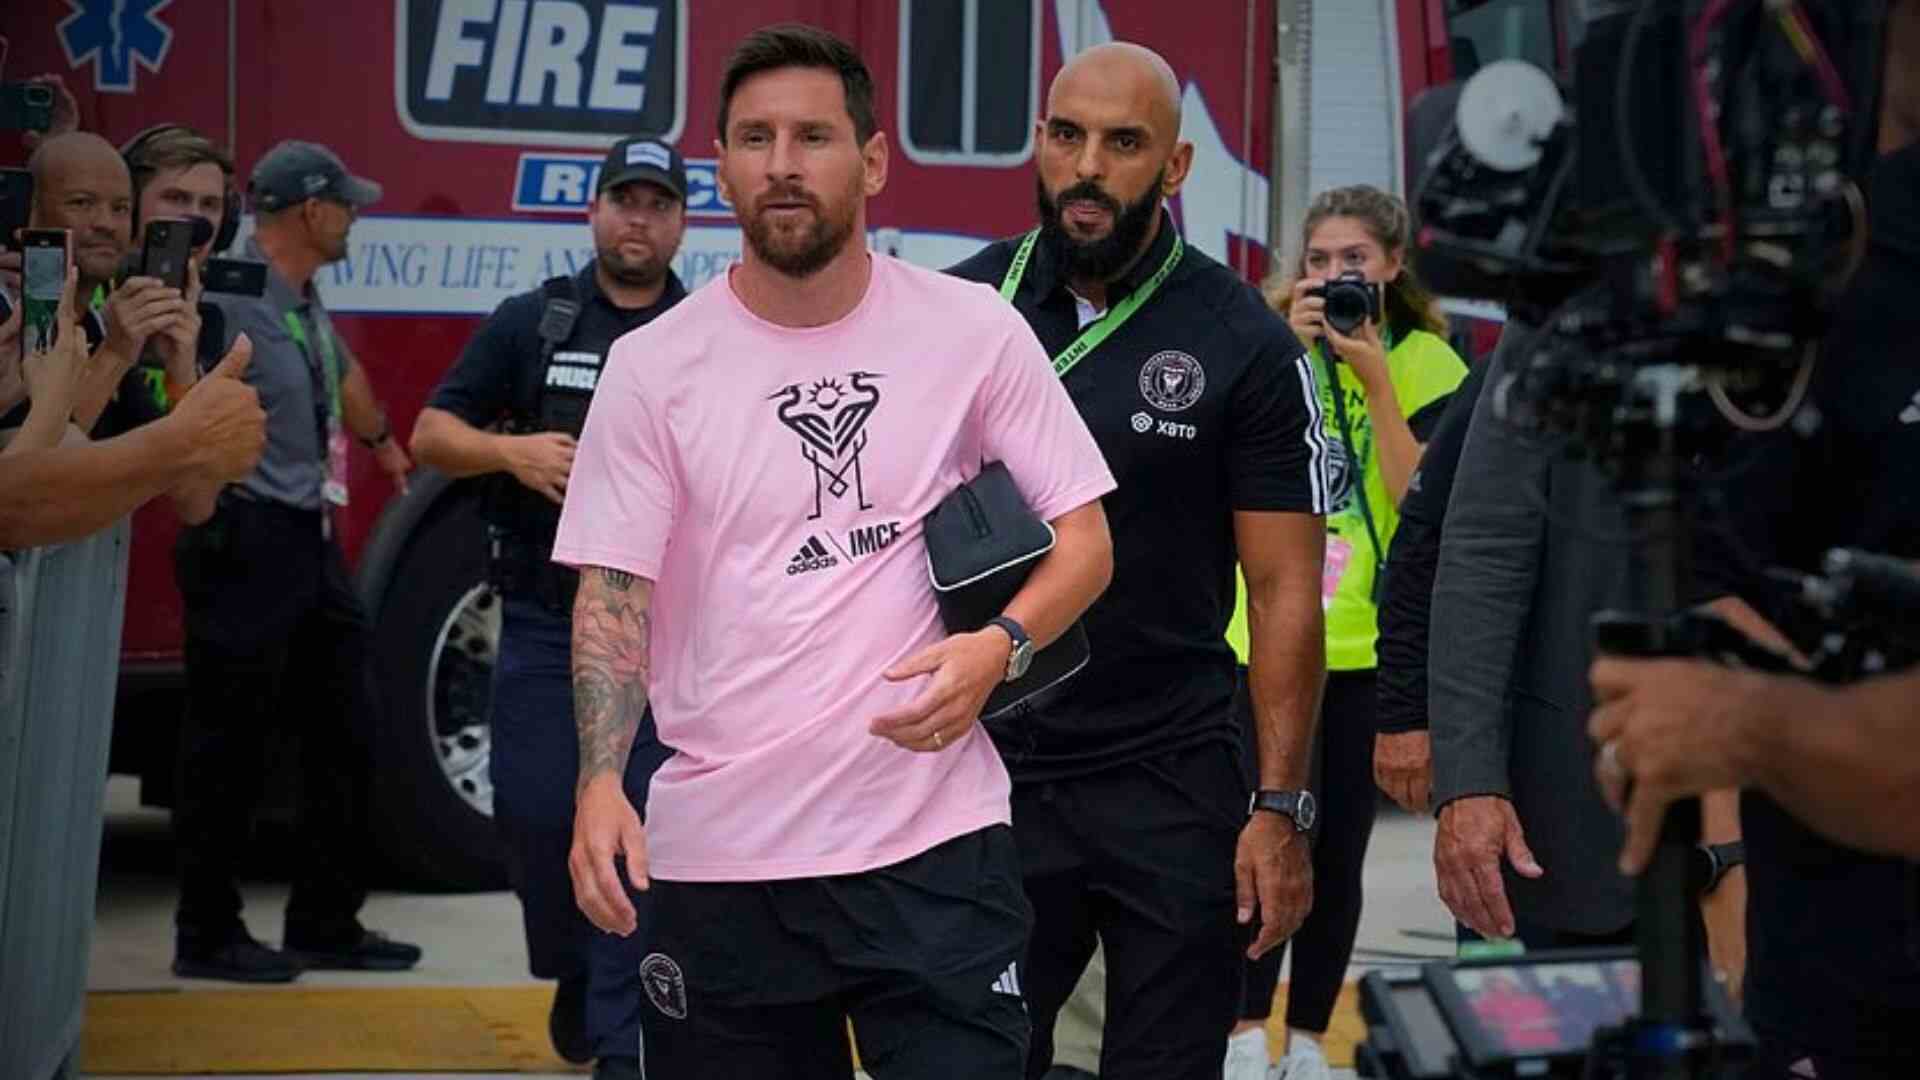 Watch: Lionel Messi’s Bodyguard In Action, Garners Praise On Social Media